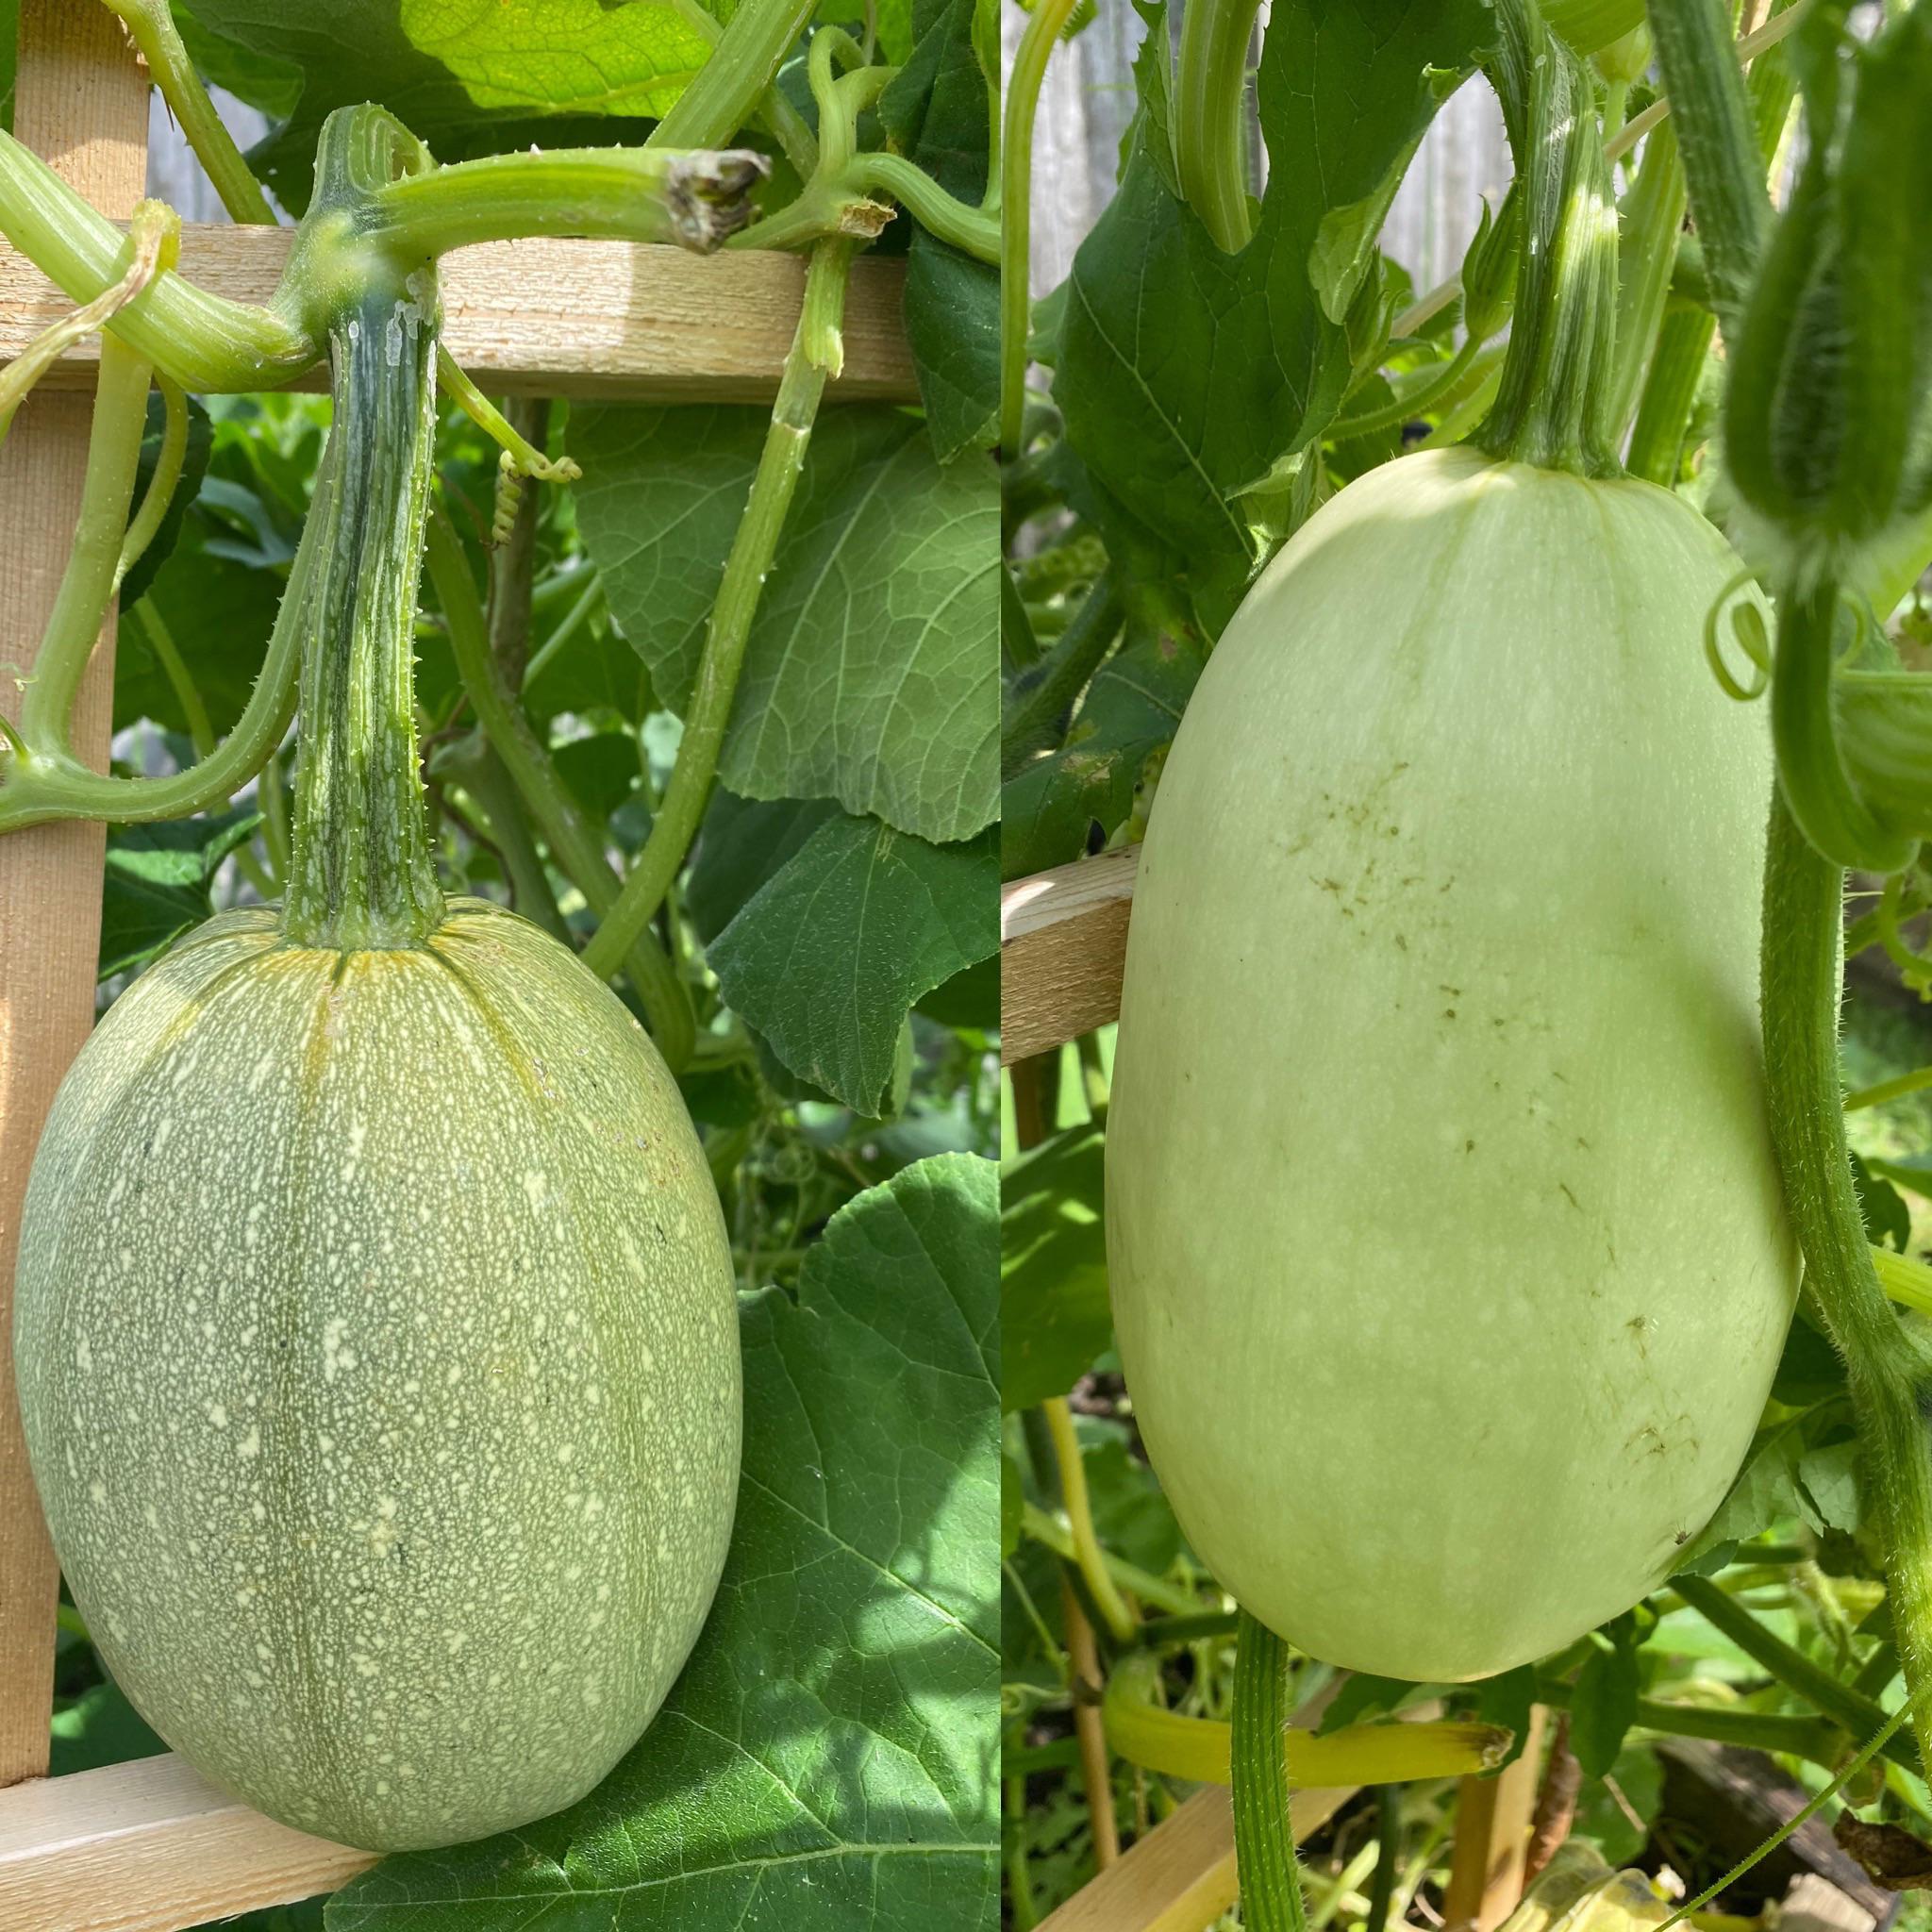 Same Plant Different Spaghetti Squash Is It Possible That The More Striped One Got Pollinated With Another Type Of Squash The One On The Left Has Been That Size For About Two